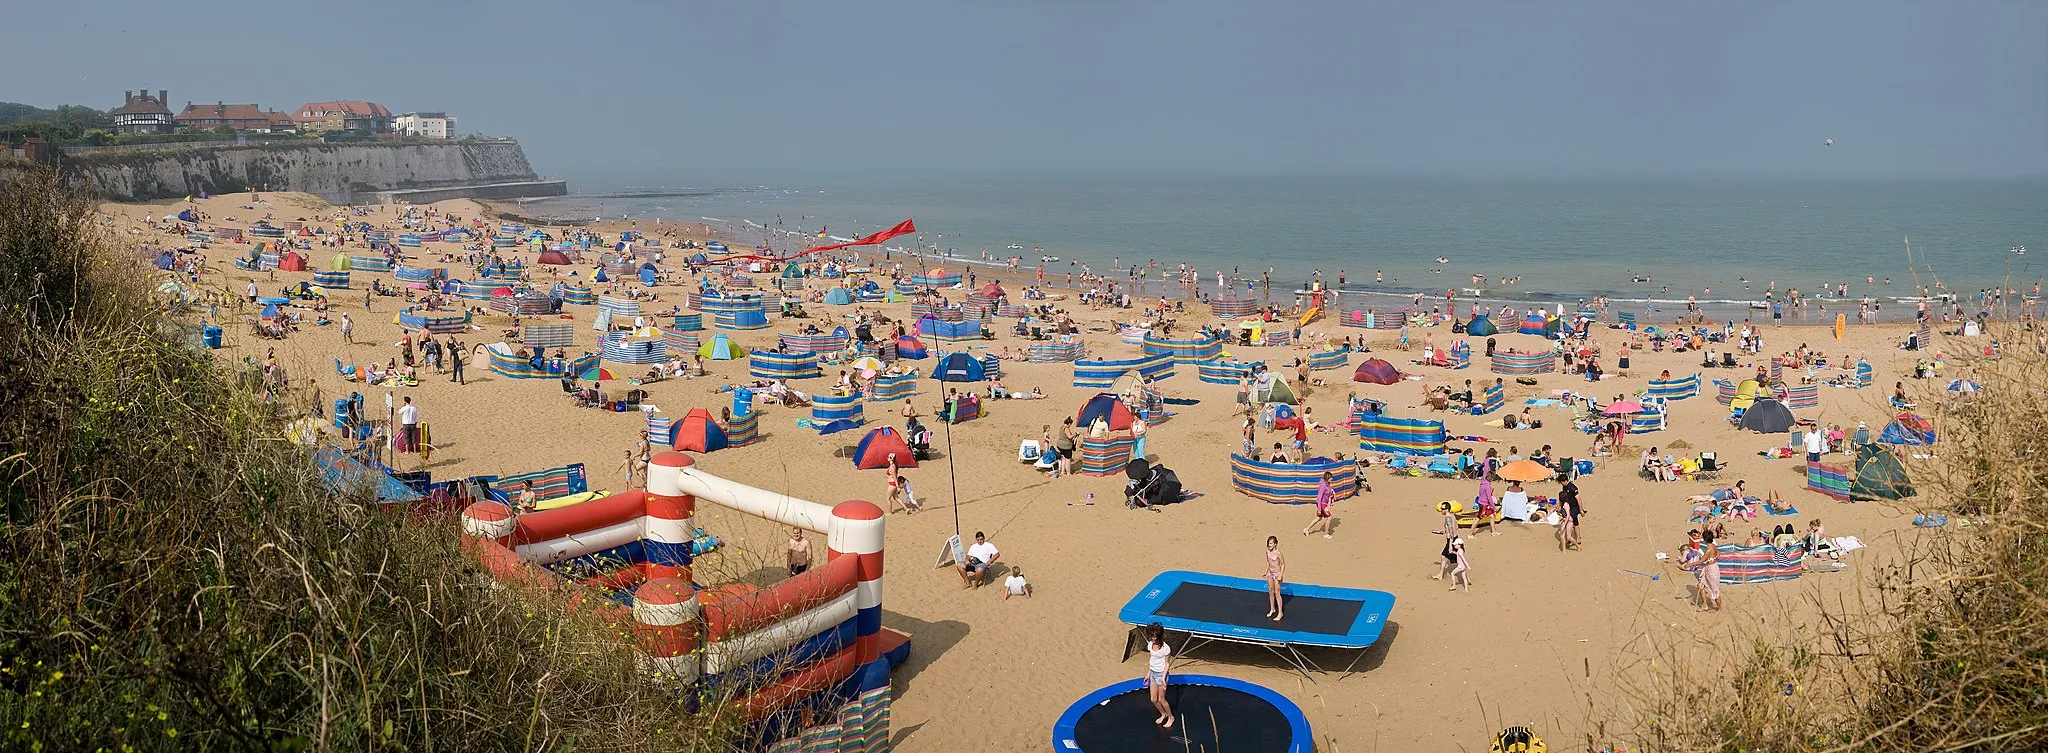 Image of Broadstairs